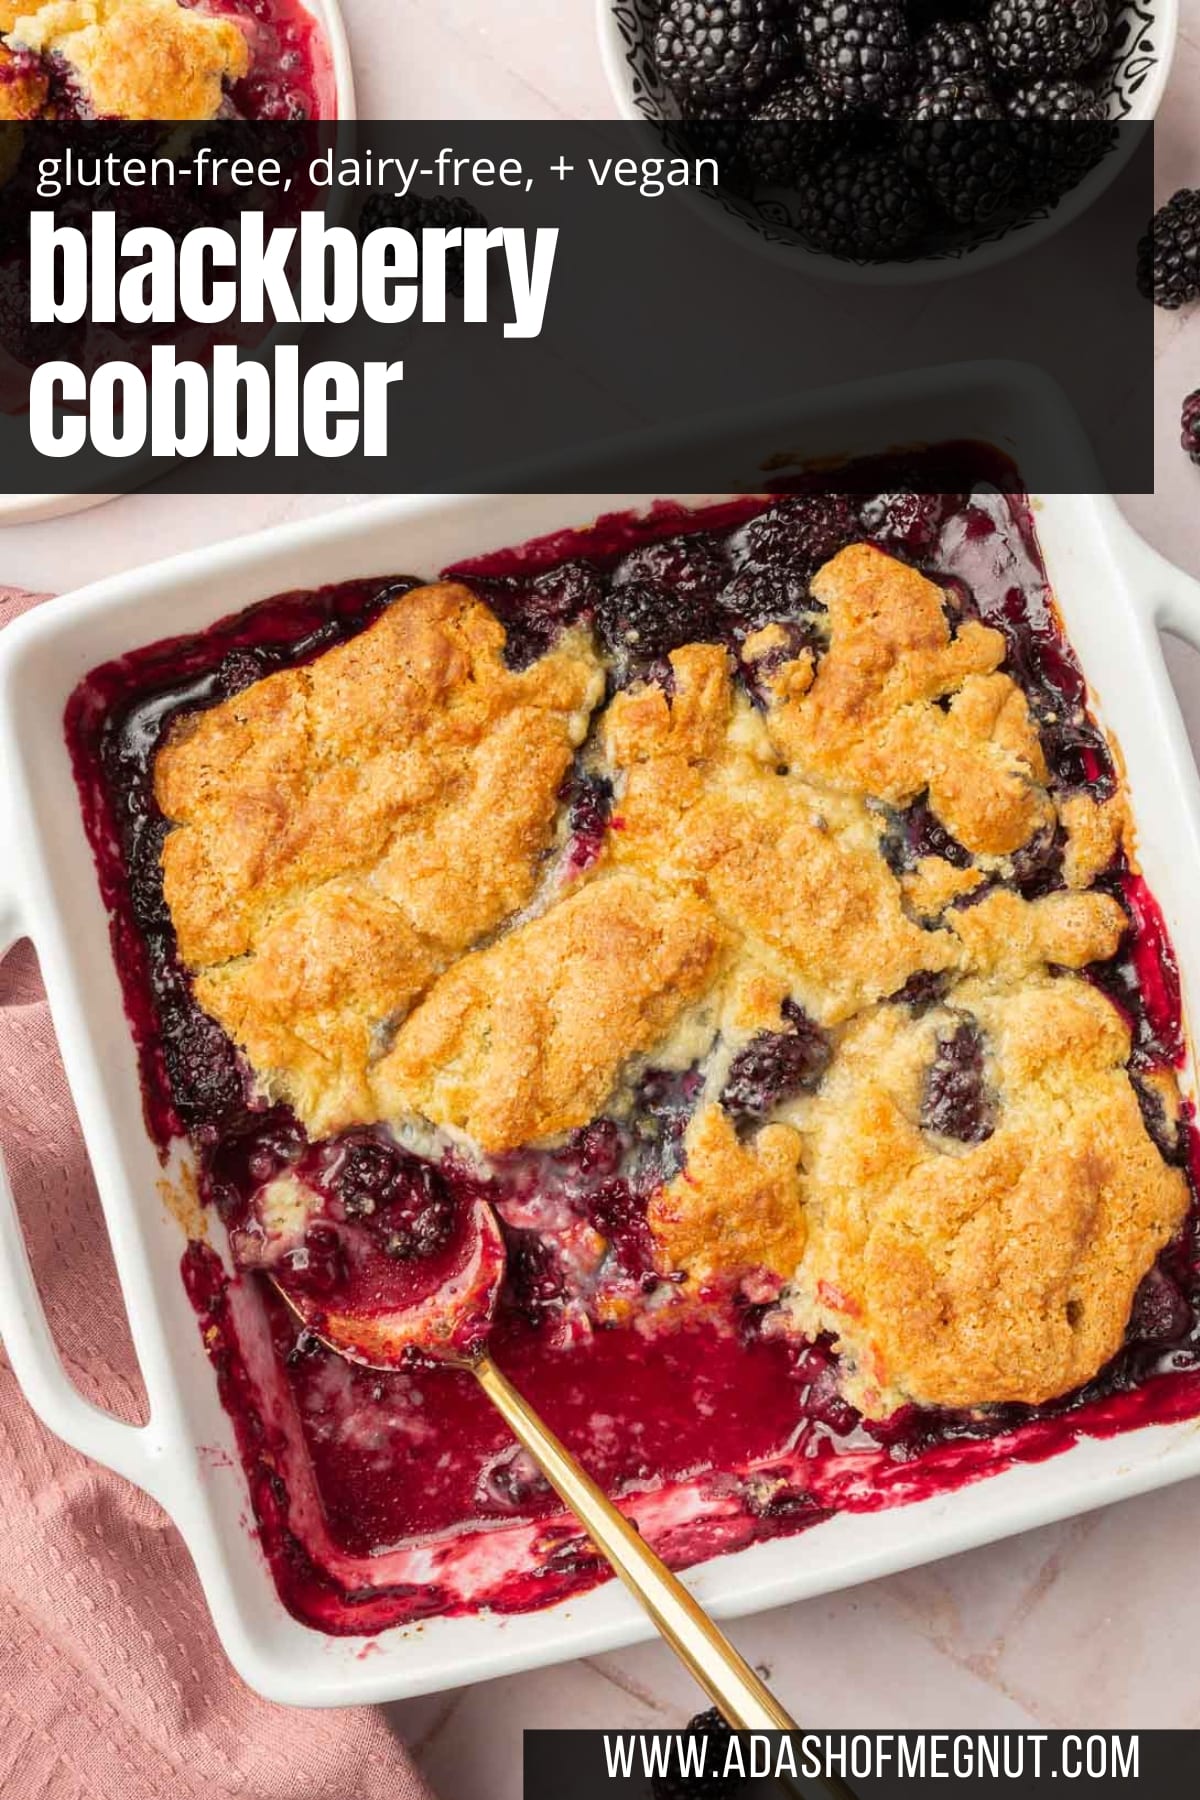 Gluten-free blackberry cobbler in a square baking dish with a spoon and a portion missing from the pan.